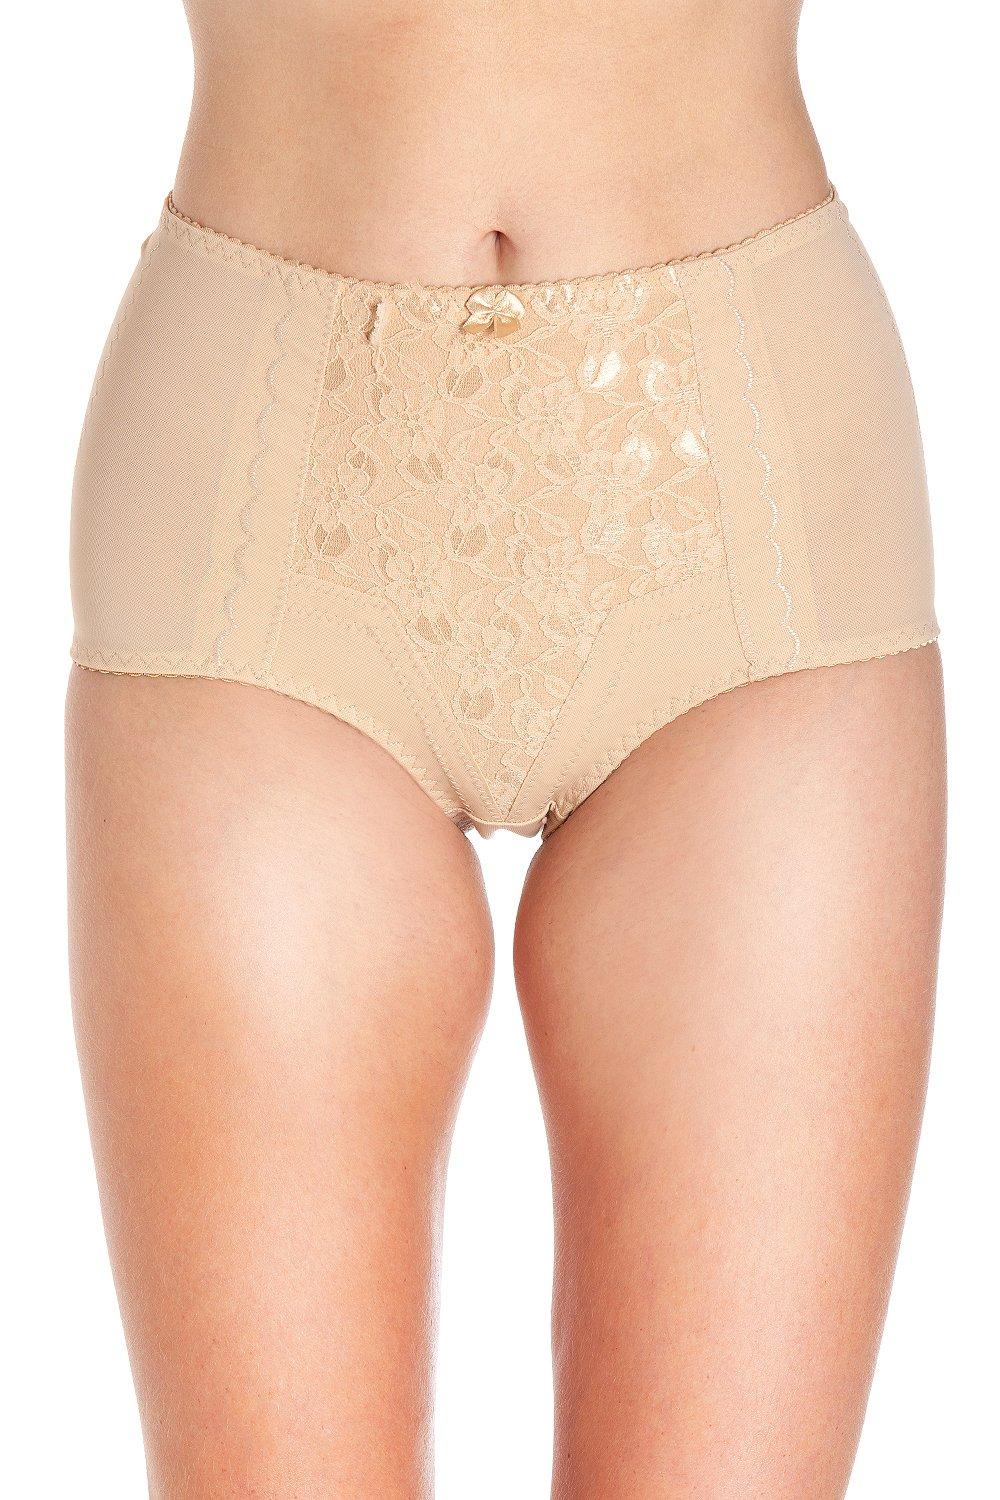 Two Pack Lace Control Shapewear Briefs